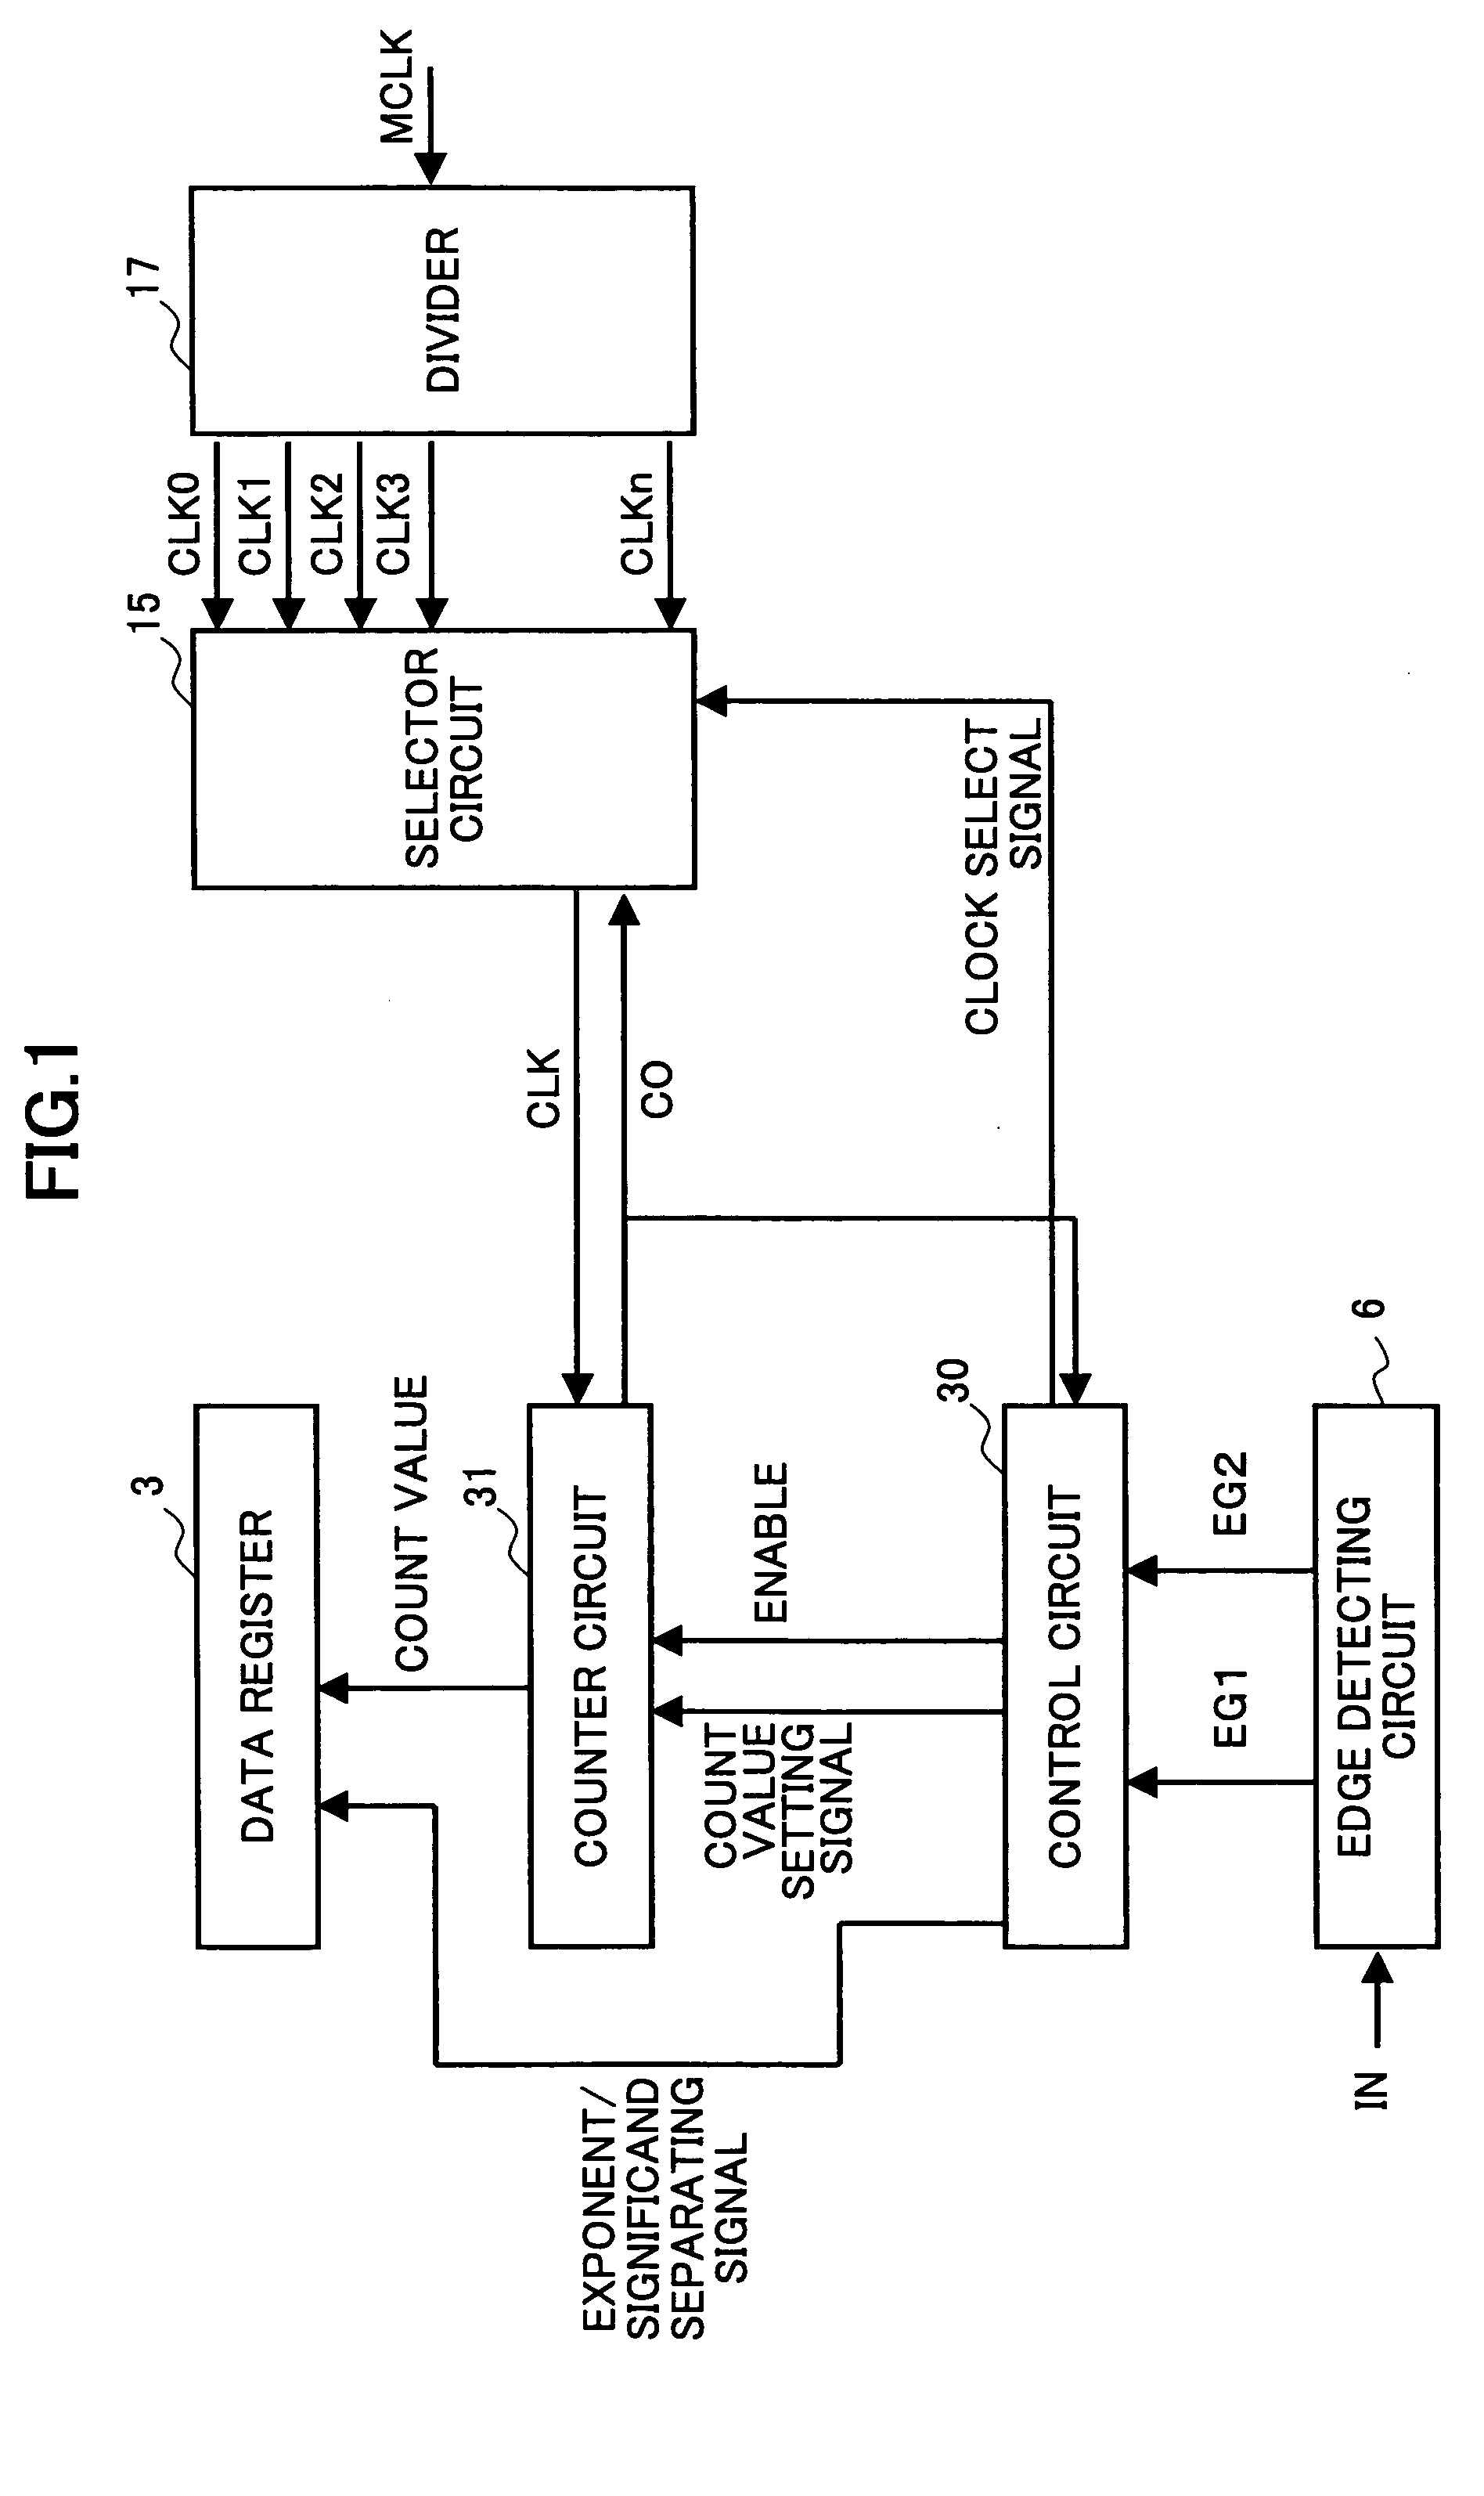 Pulse width measuring device with automatic range setting function